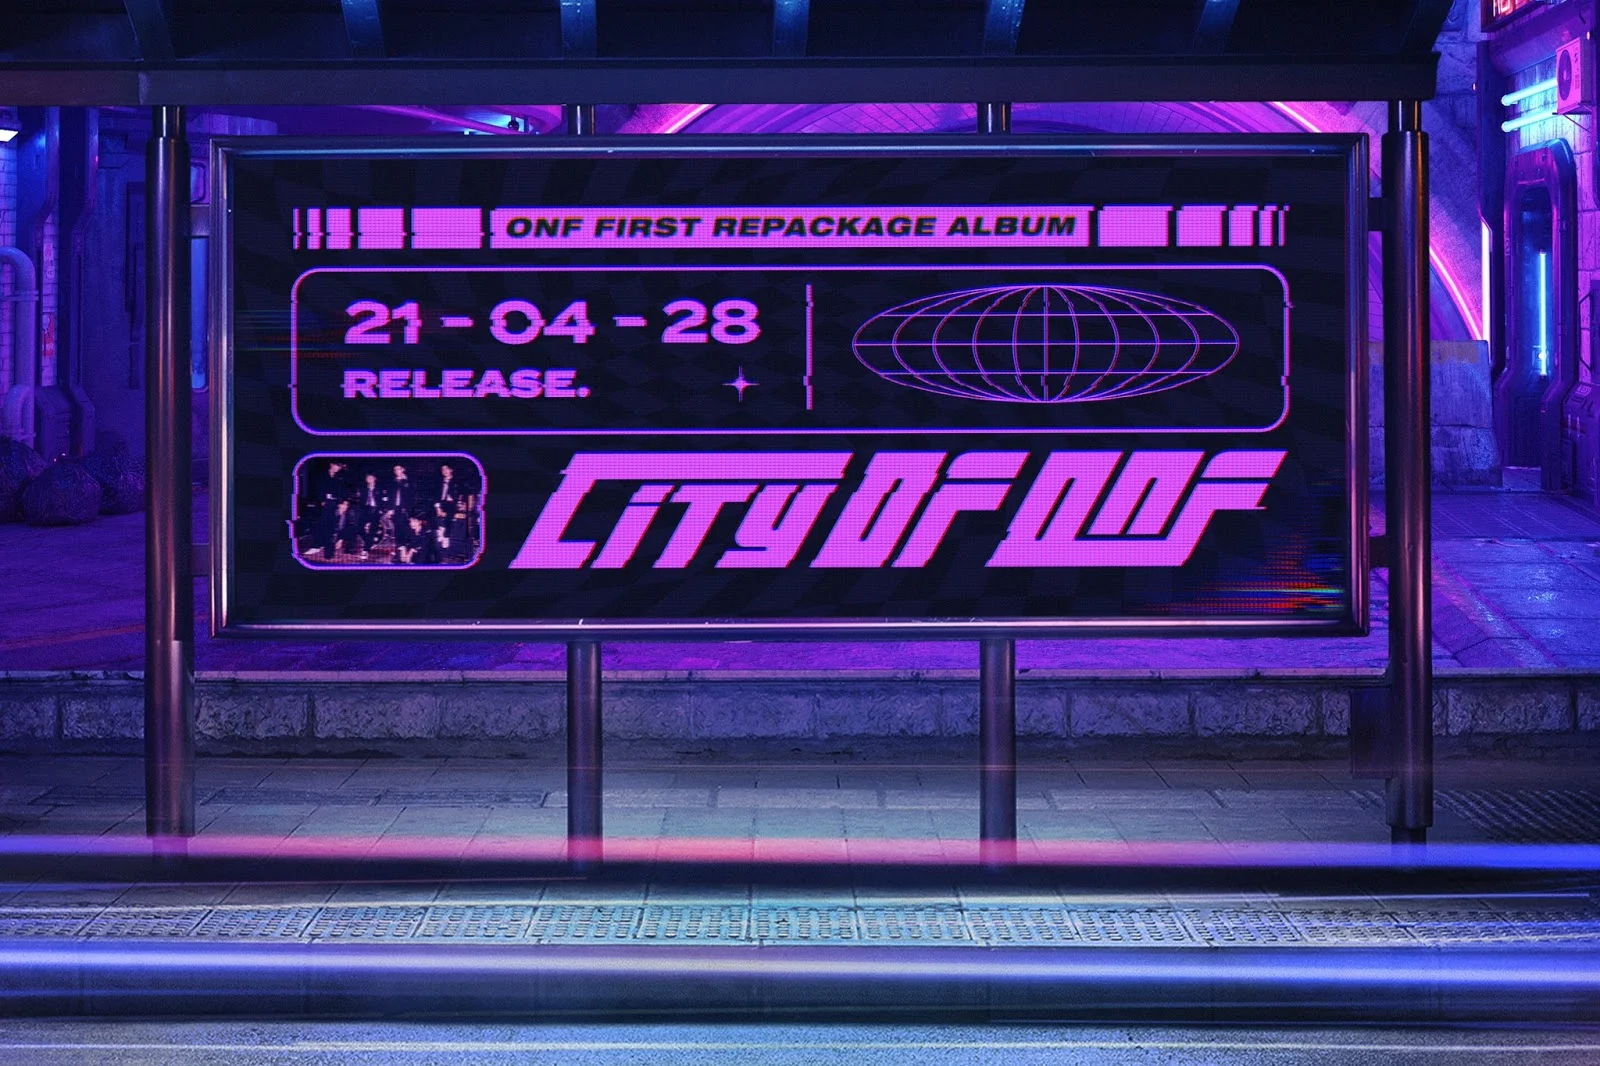 city of onf teaser